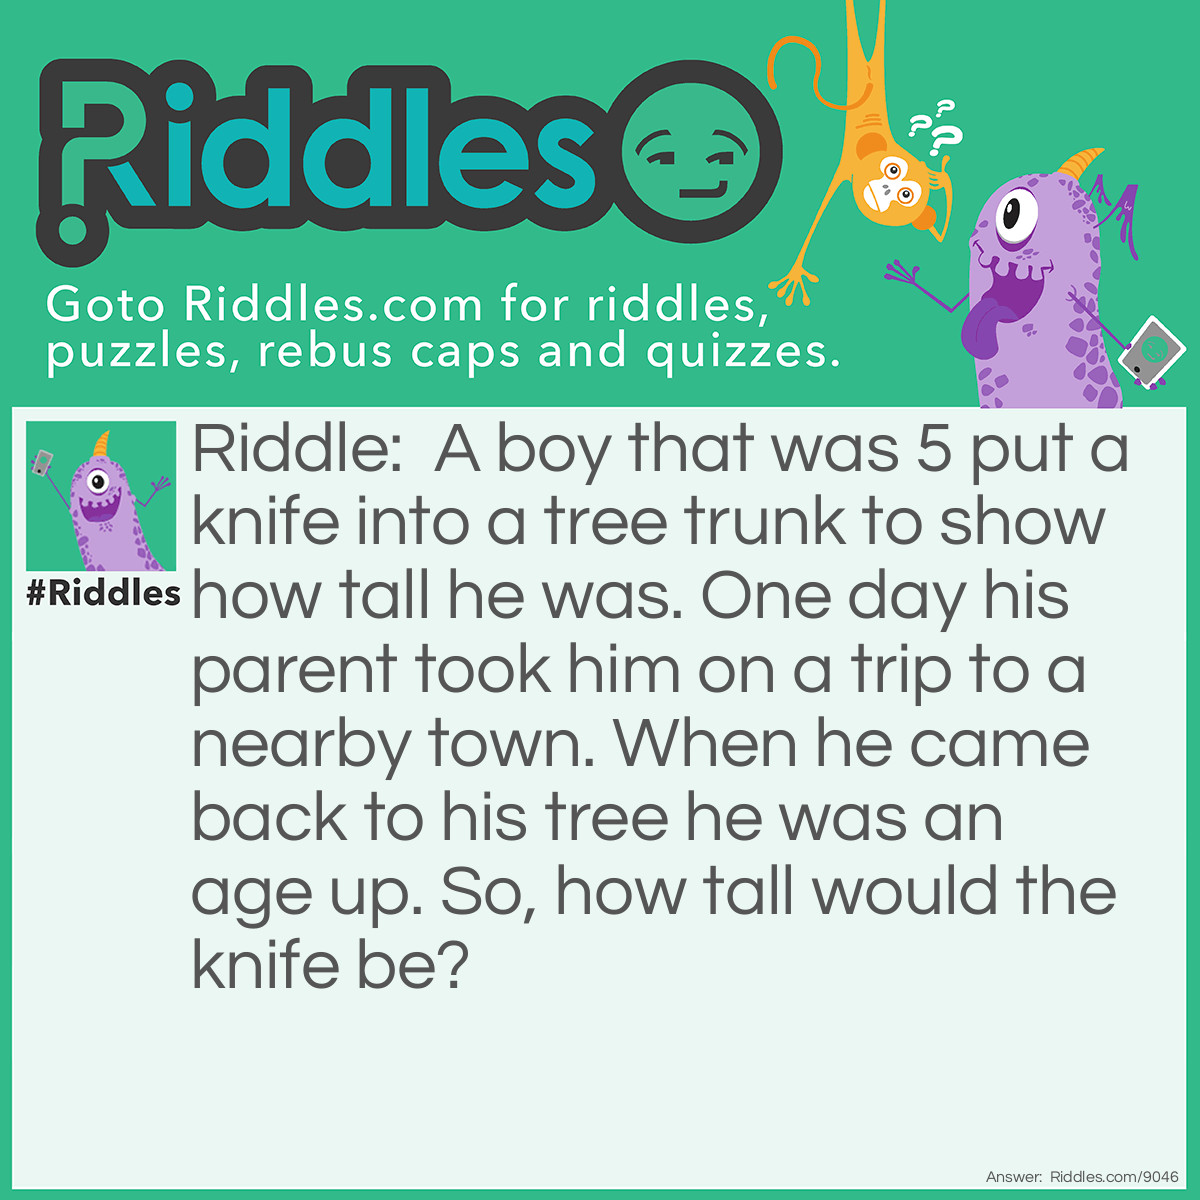 Riddle: A boy that was 5 put a knife into a tree trunk to show how tall he was. One day his parent took him on a trip to a nearby town. When he came back to his tree he was an age up. So, how tall would the knife be? Answer: The knife was at the same place because trees grow on the top, not the bottom.